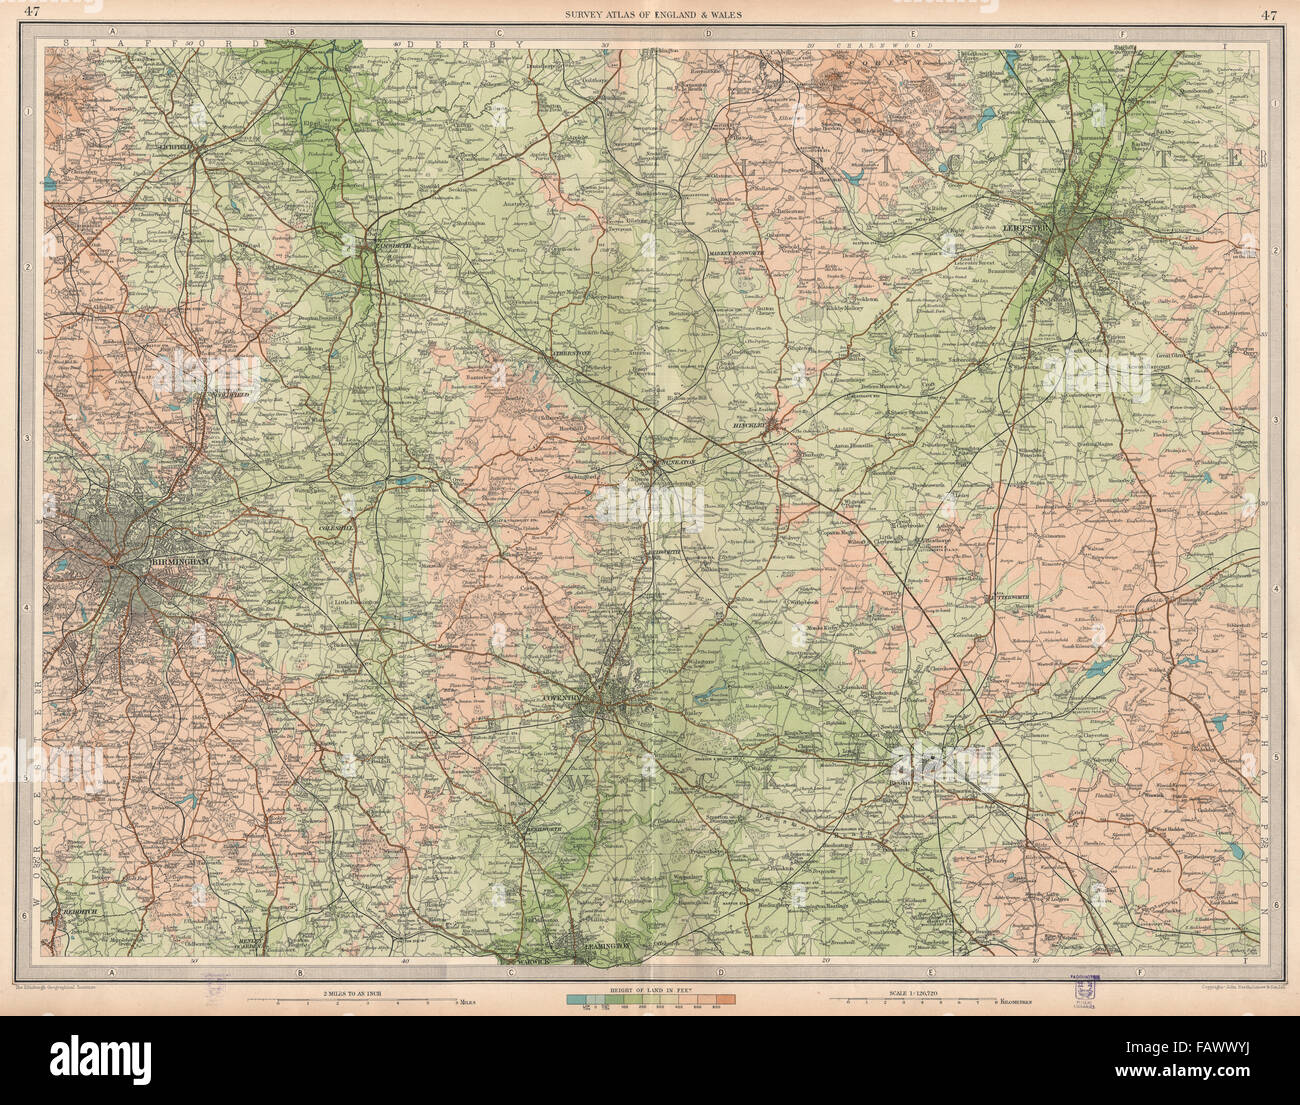 MIDLANDS:Birmingham Rugby Leicester Coventry Leamington Spa Redditch, 1939 map Stock Photo